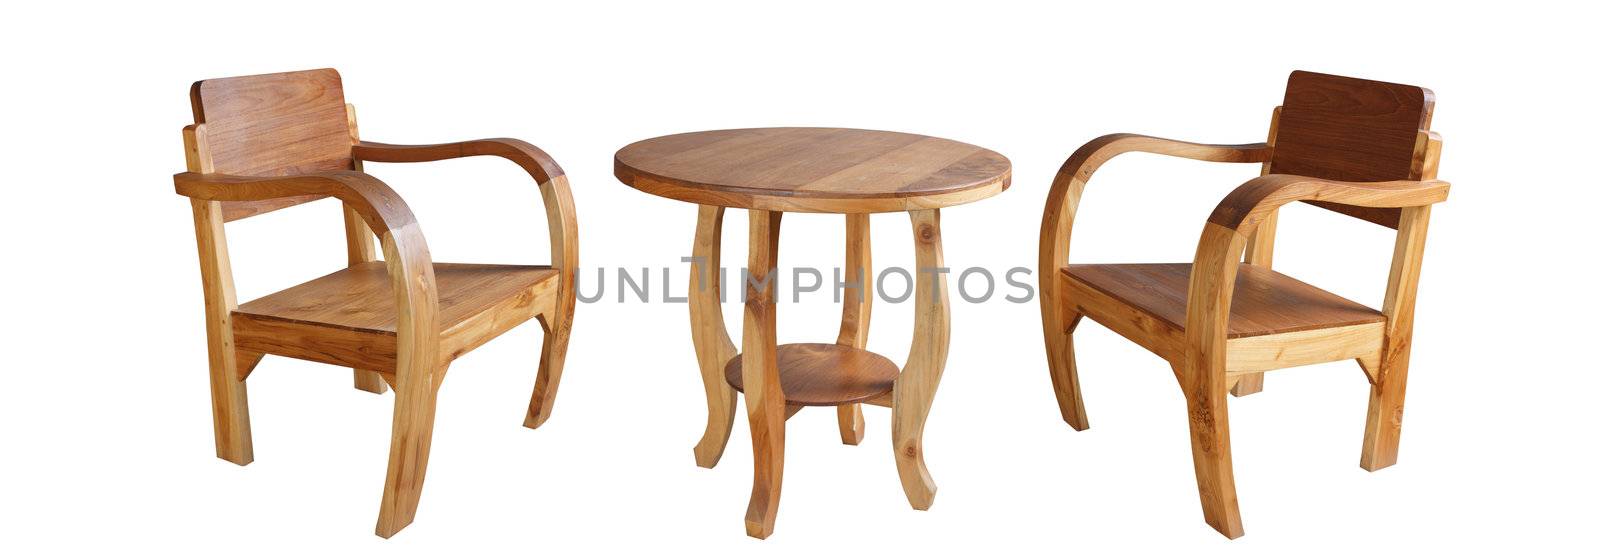 Set of wooden chairs and table by punsayaporn